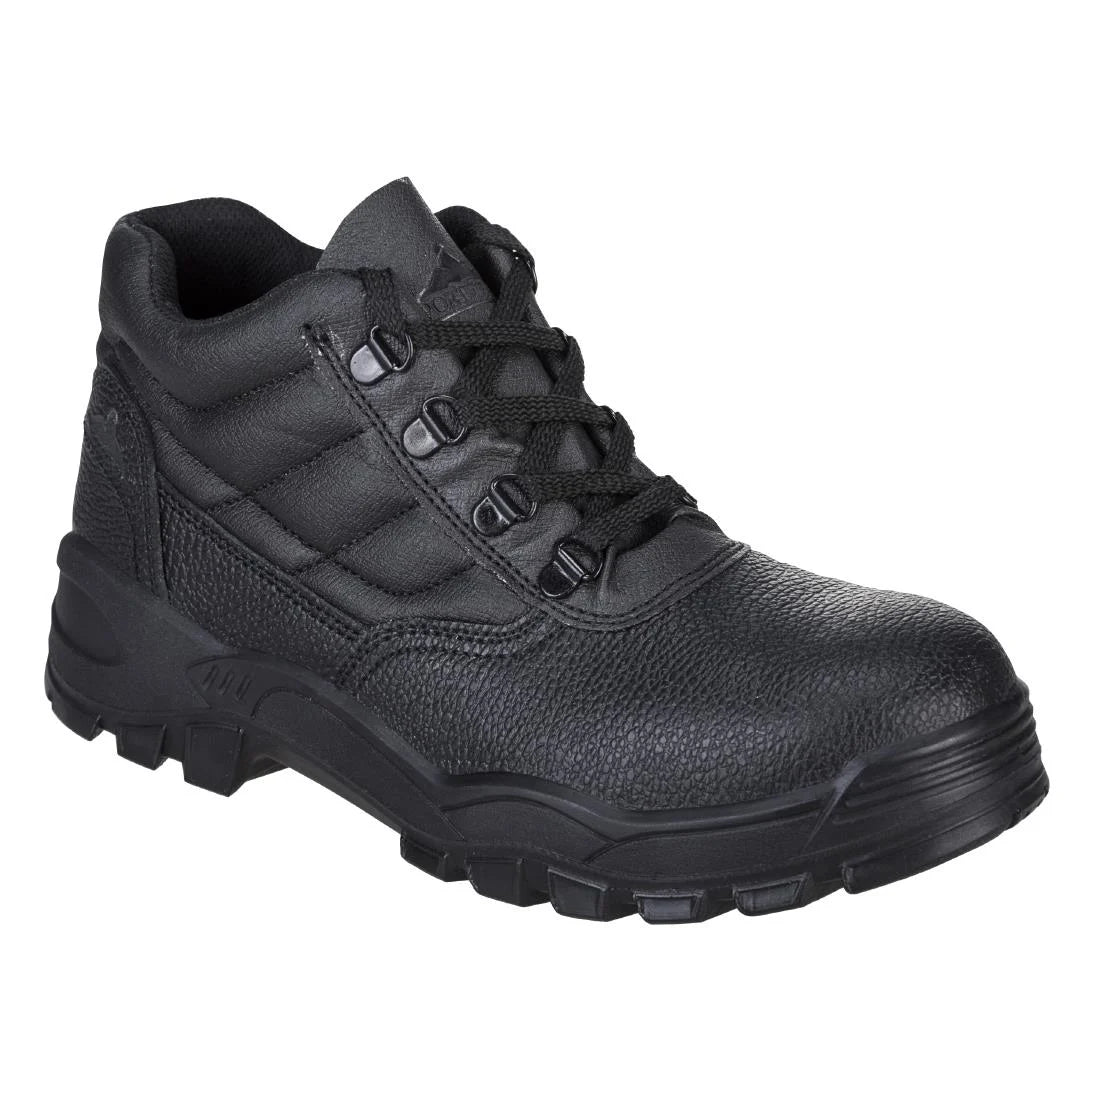 BA059-37 Portwest Protector Boot S1P Black Size 37 JD Catering Equipment Solutions Ltd